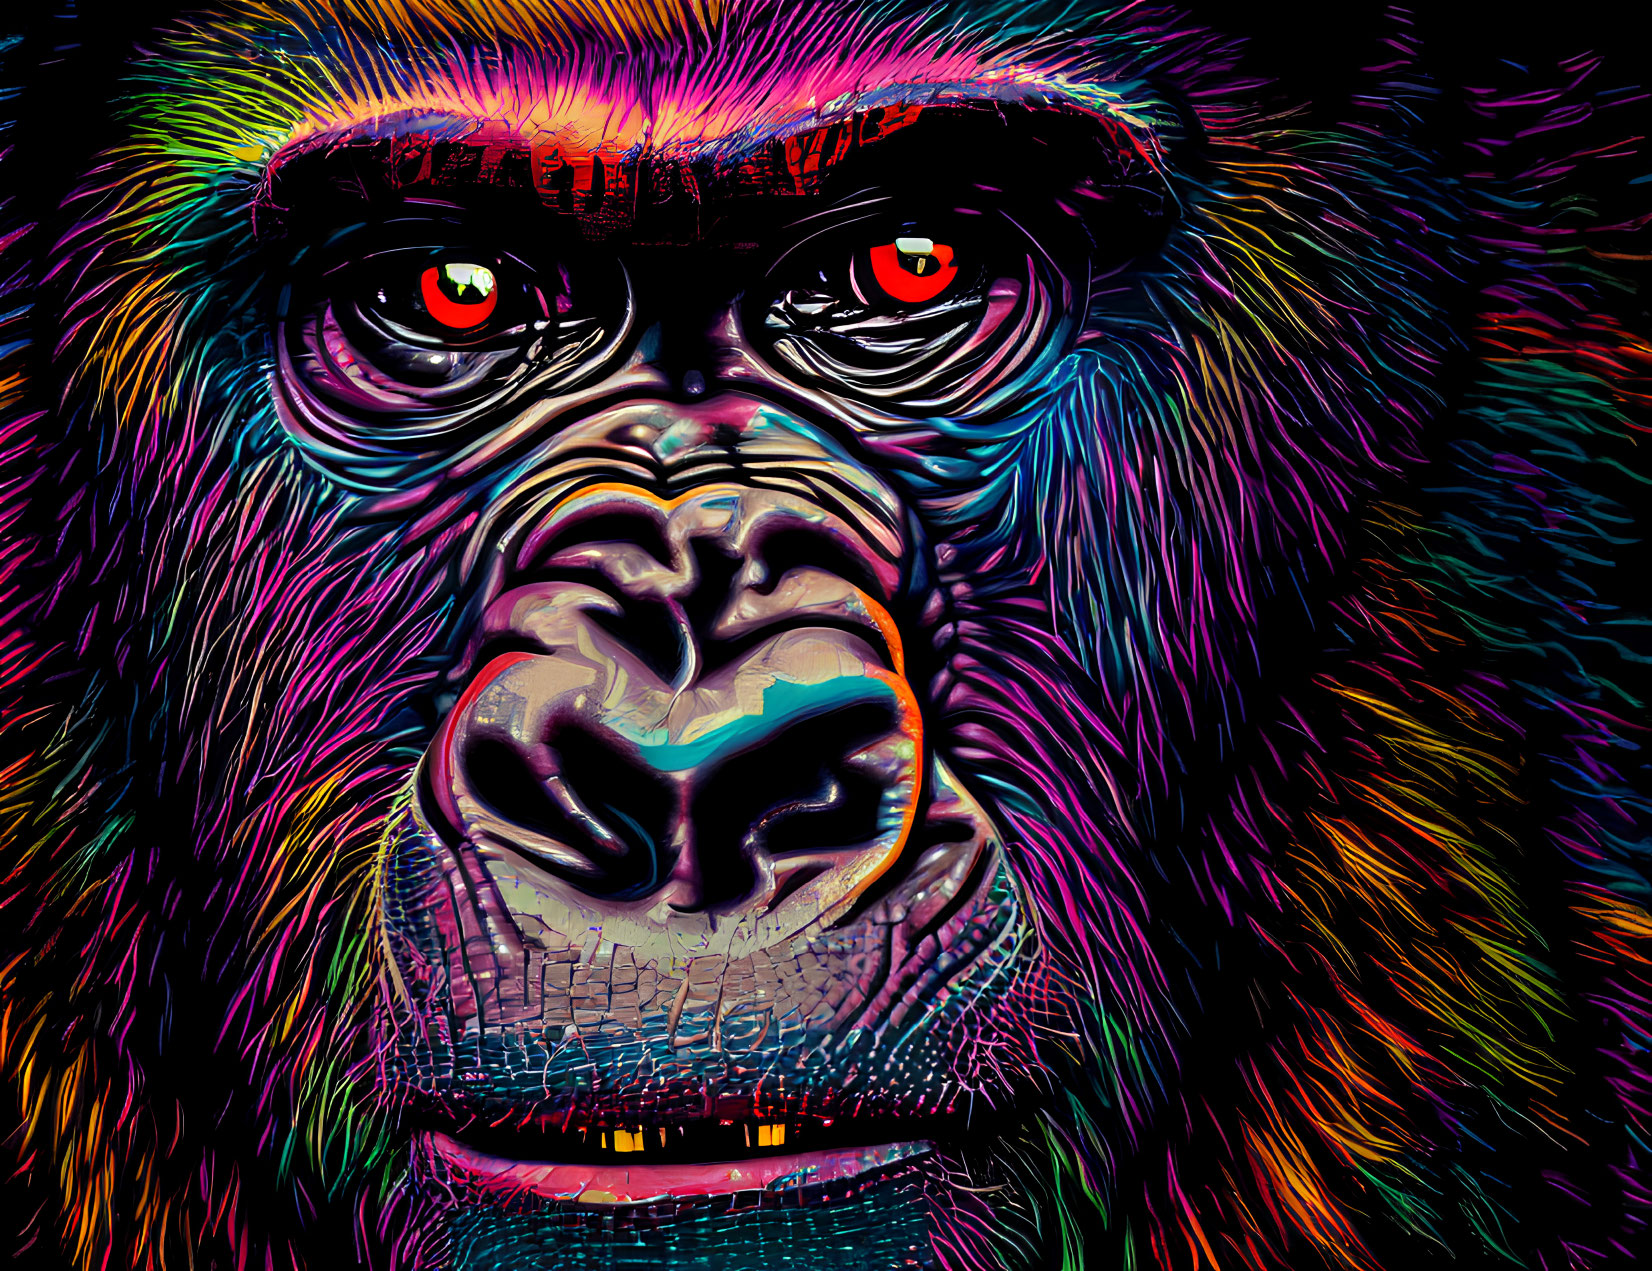 Colorful Neon Gorilla Face Artwork with Red Eyes and Multi-Colored Fur